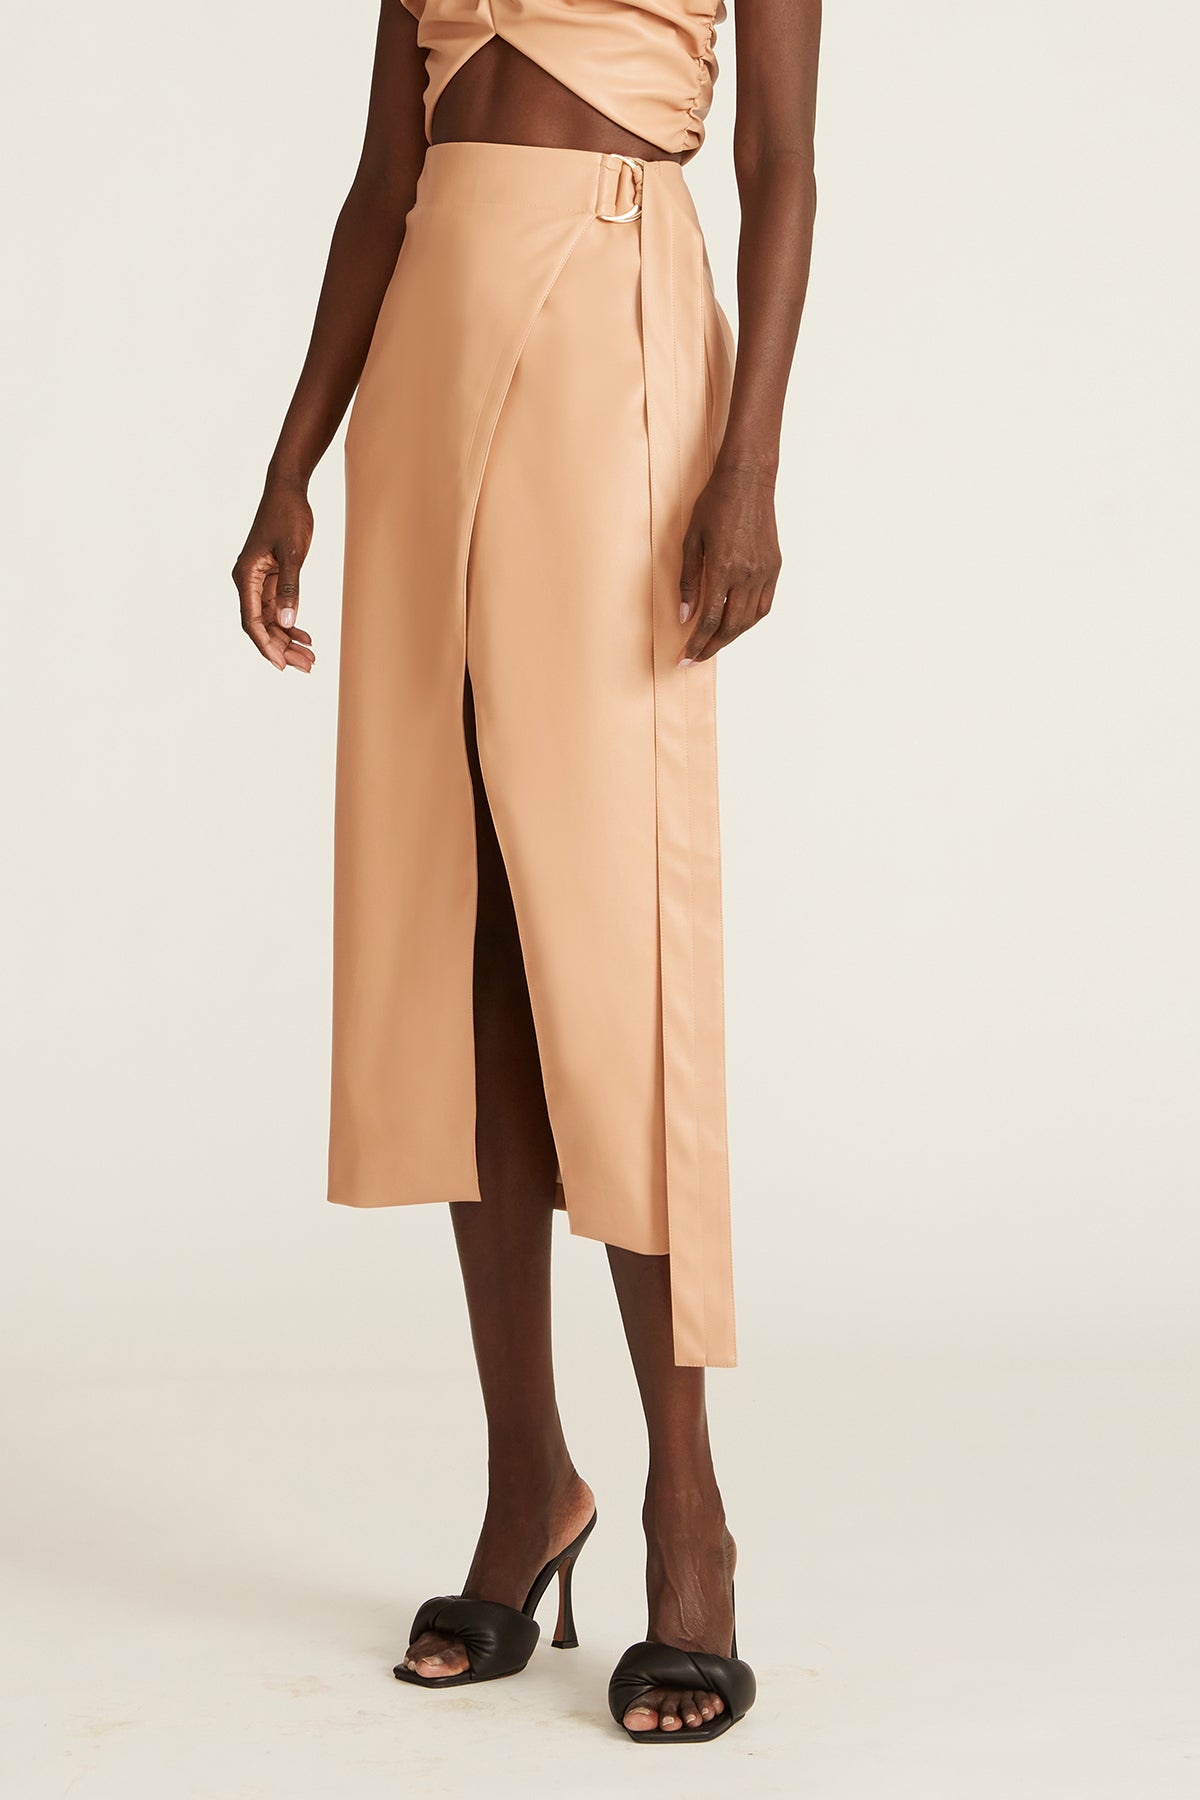 Ansley Faux Leather Wrap Skirt